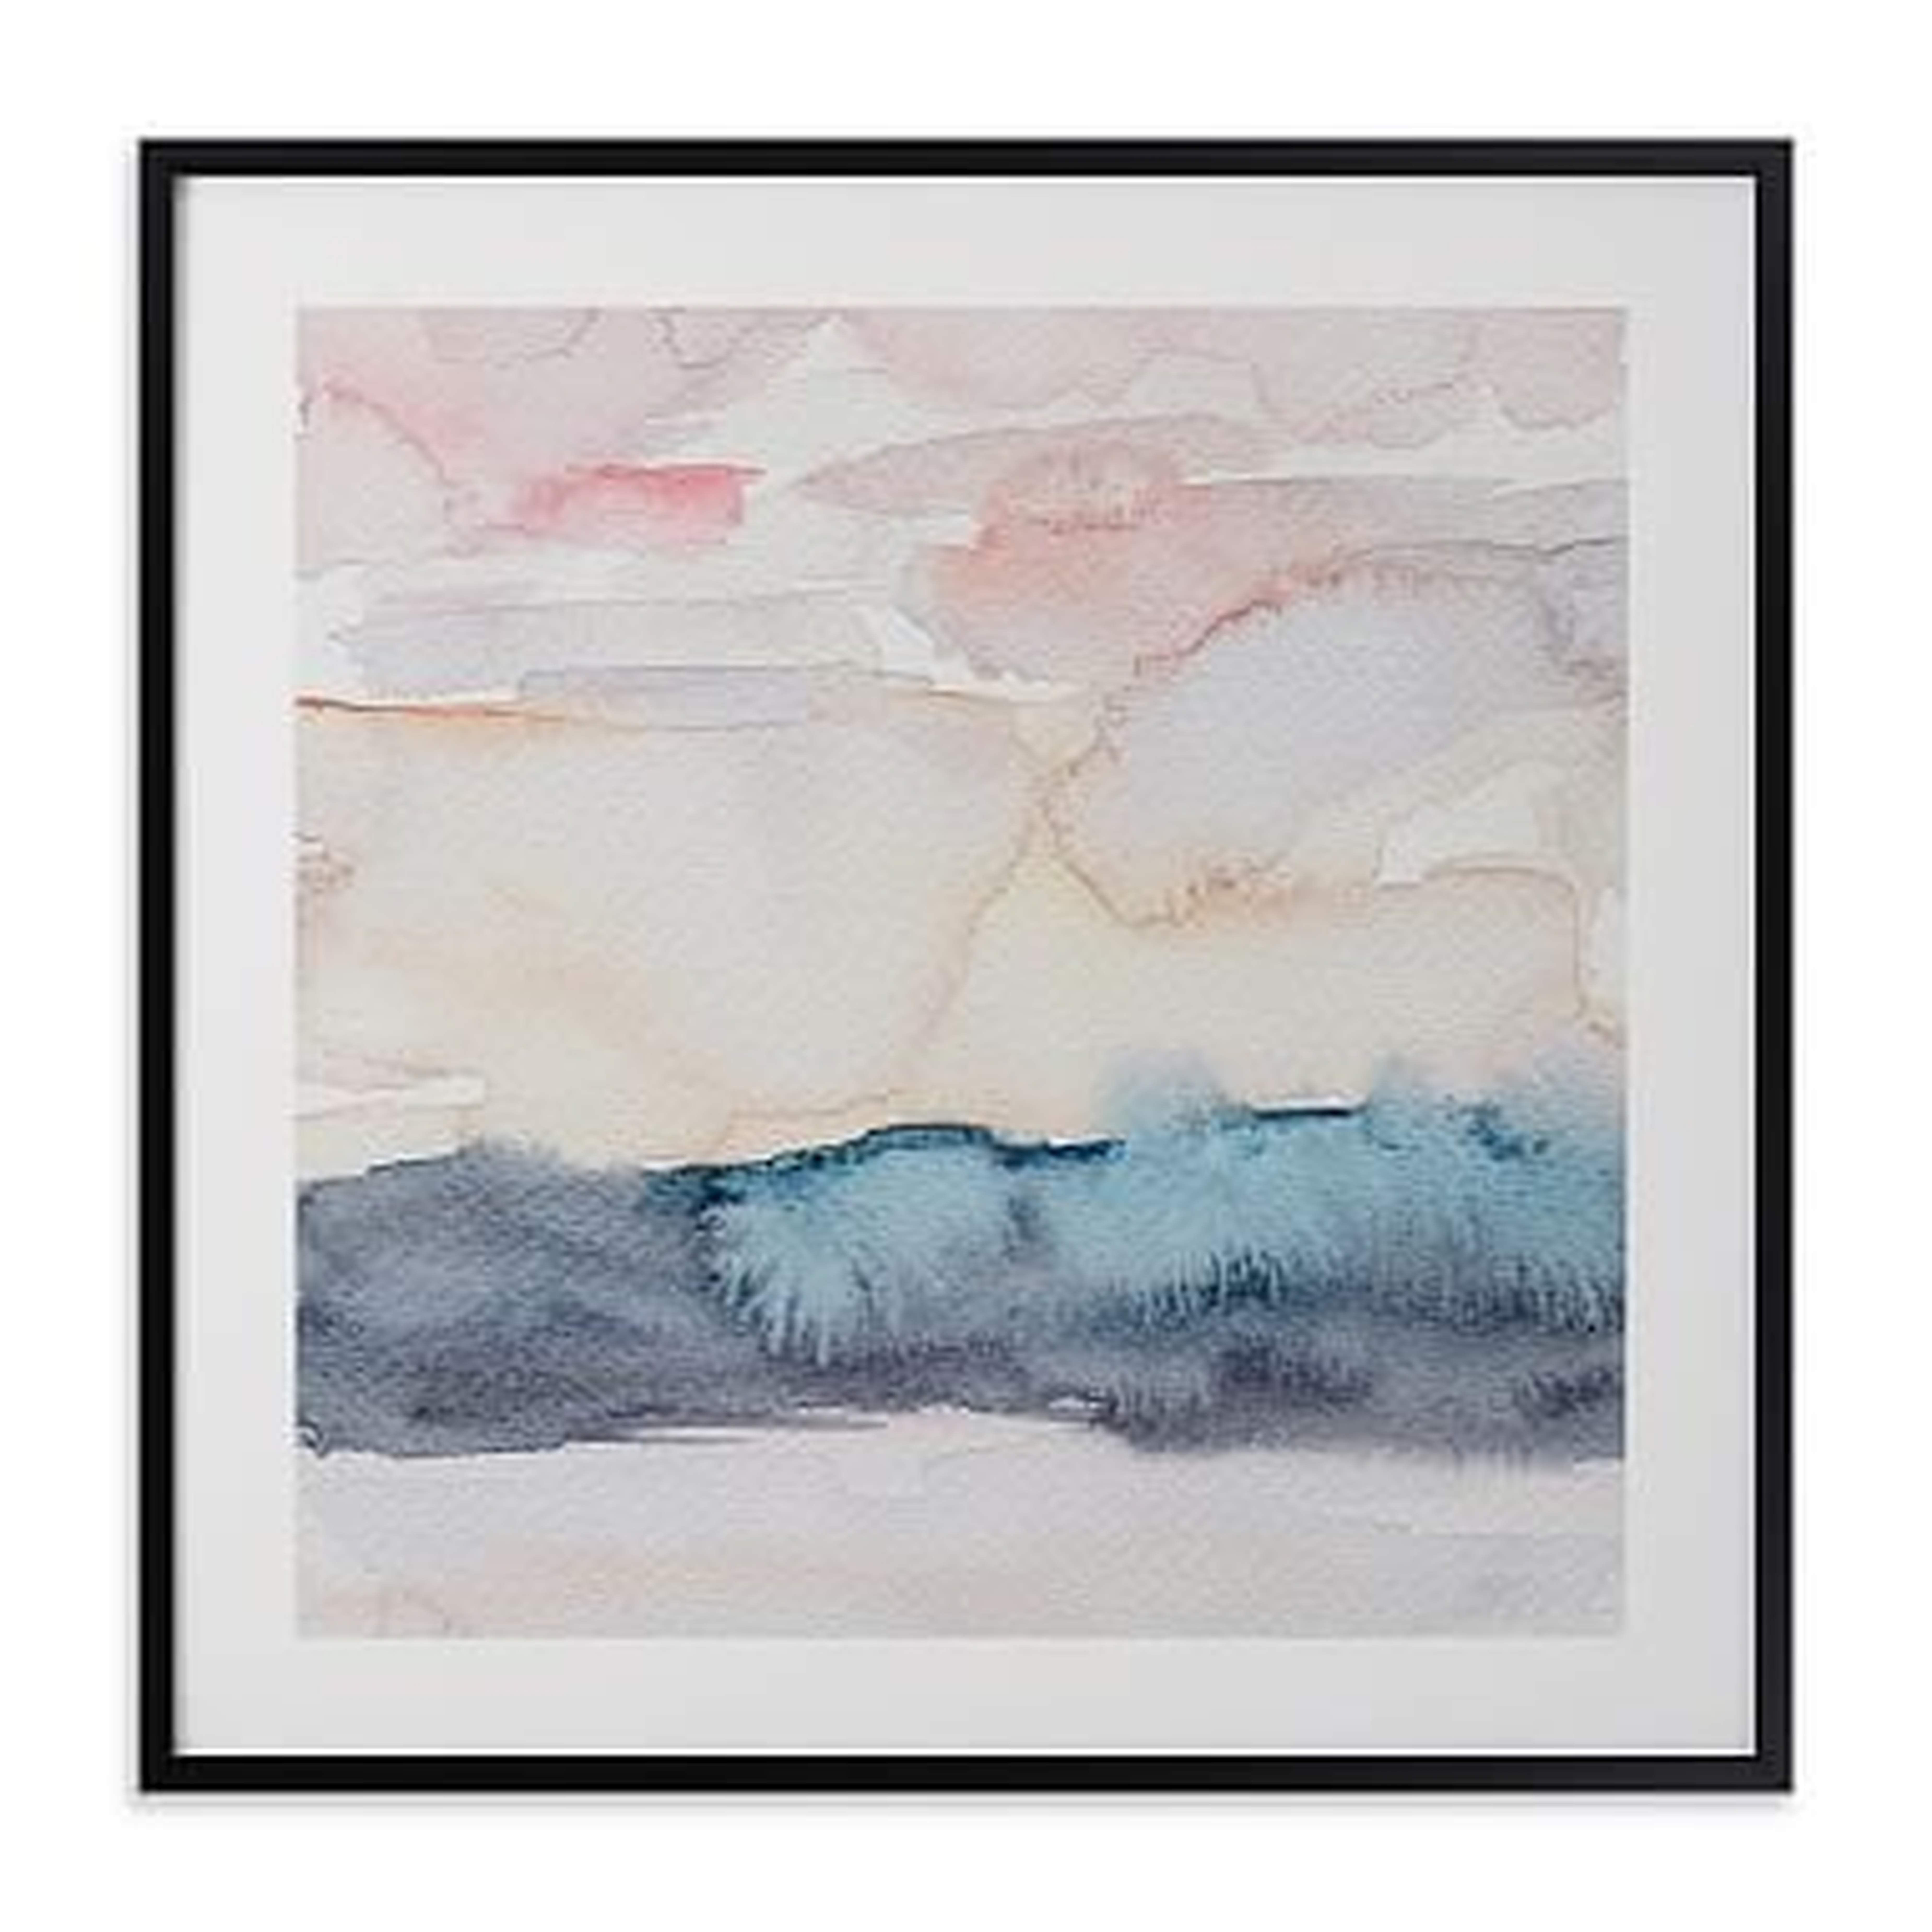 Hebridean Sunset No 1 Wall Art By Minted®, 8"X8", Black - Pottery Barn Teen